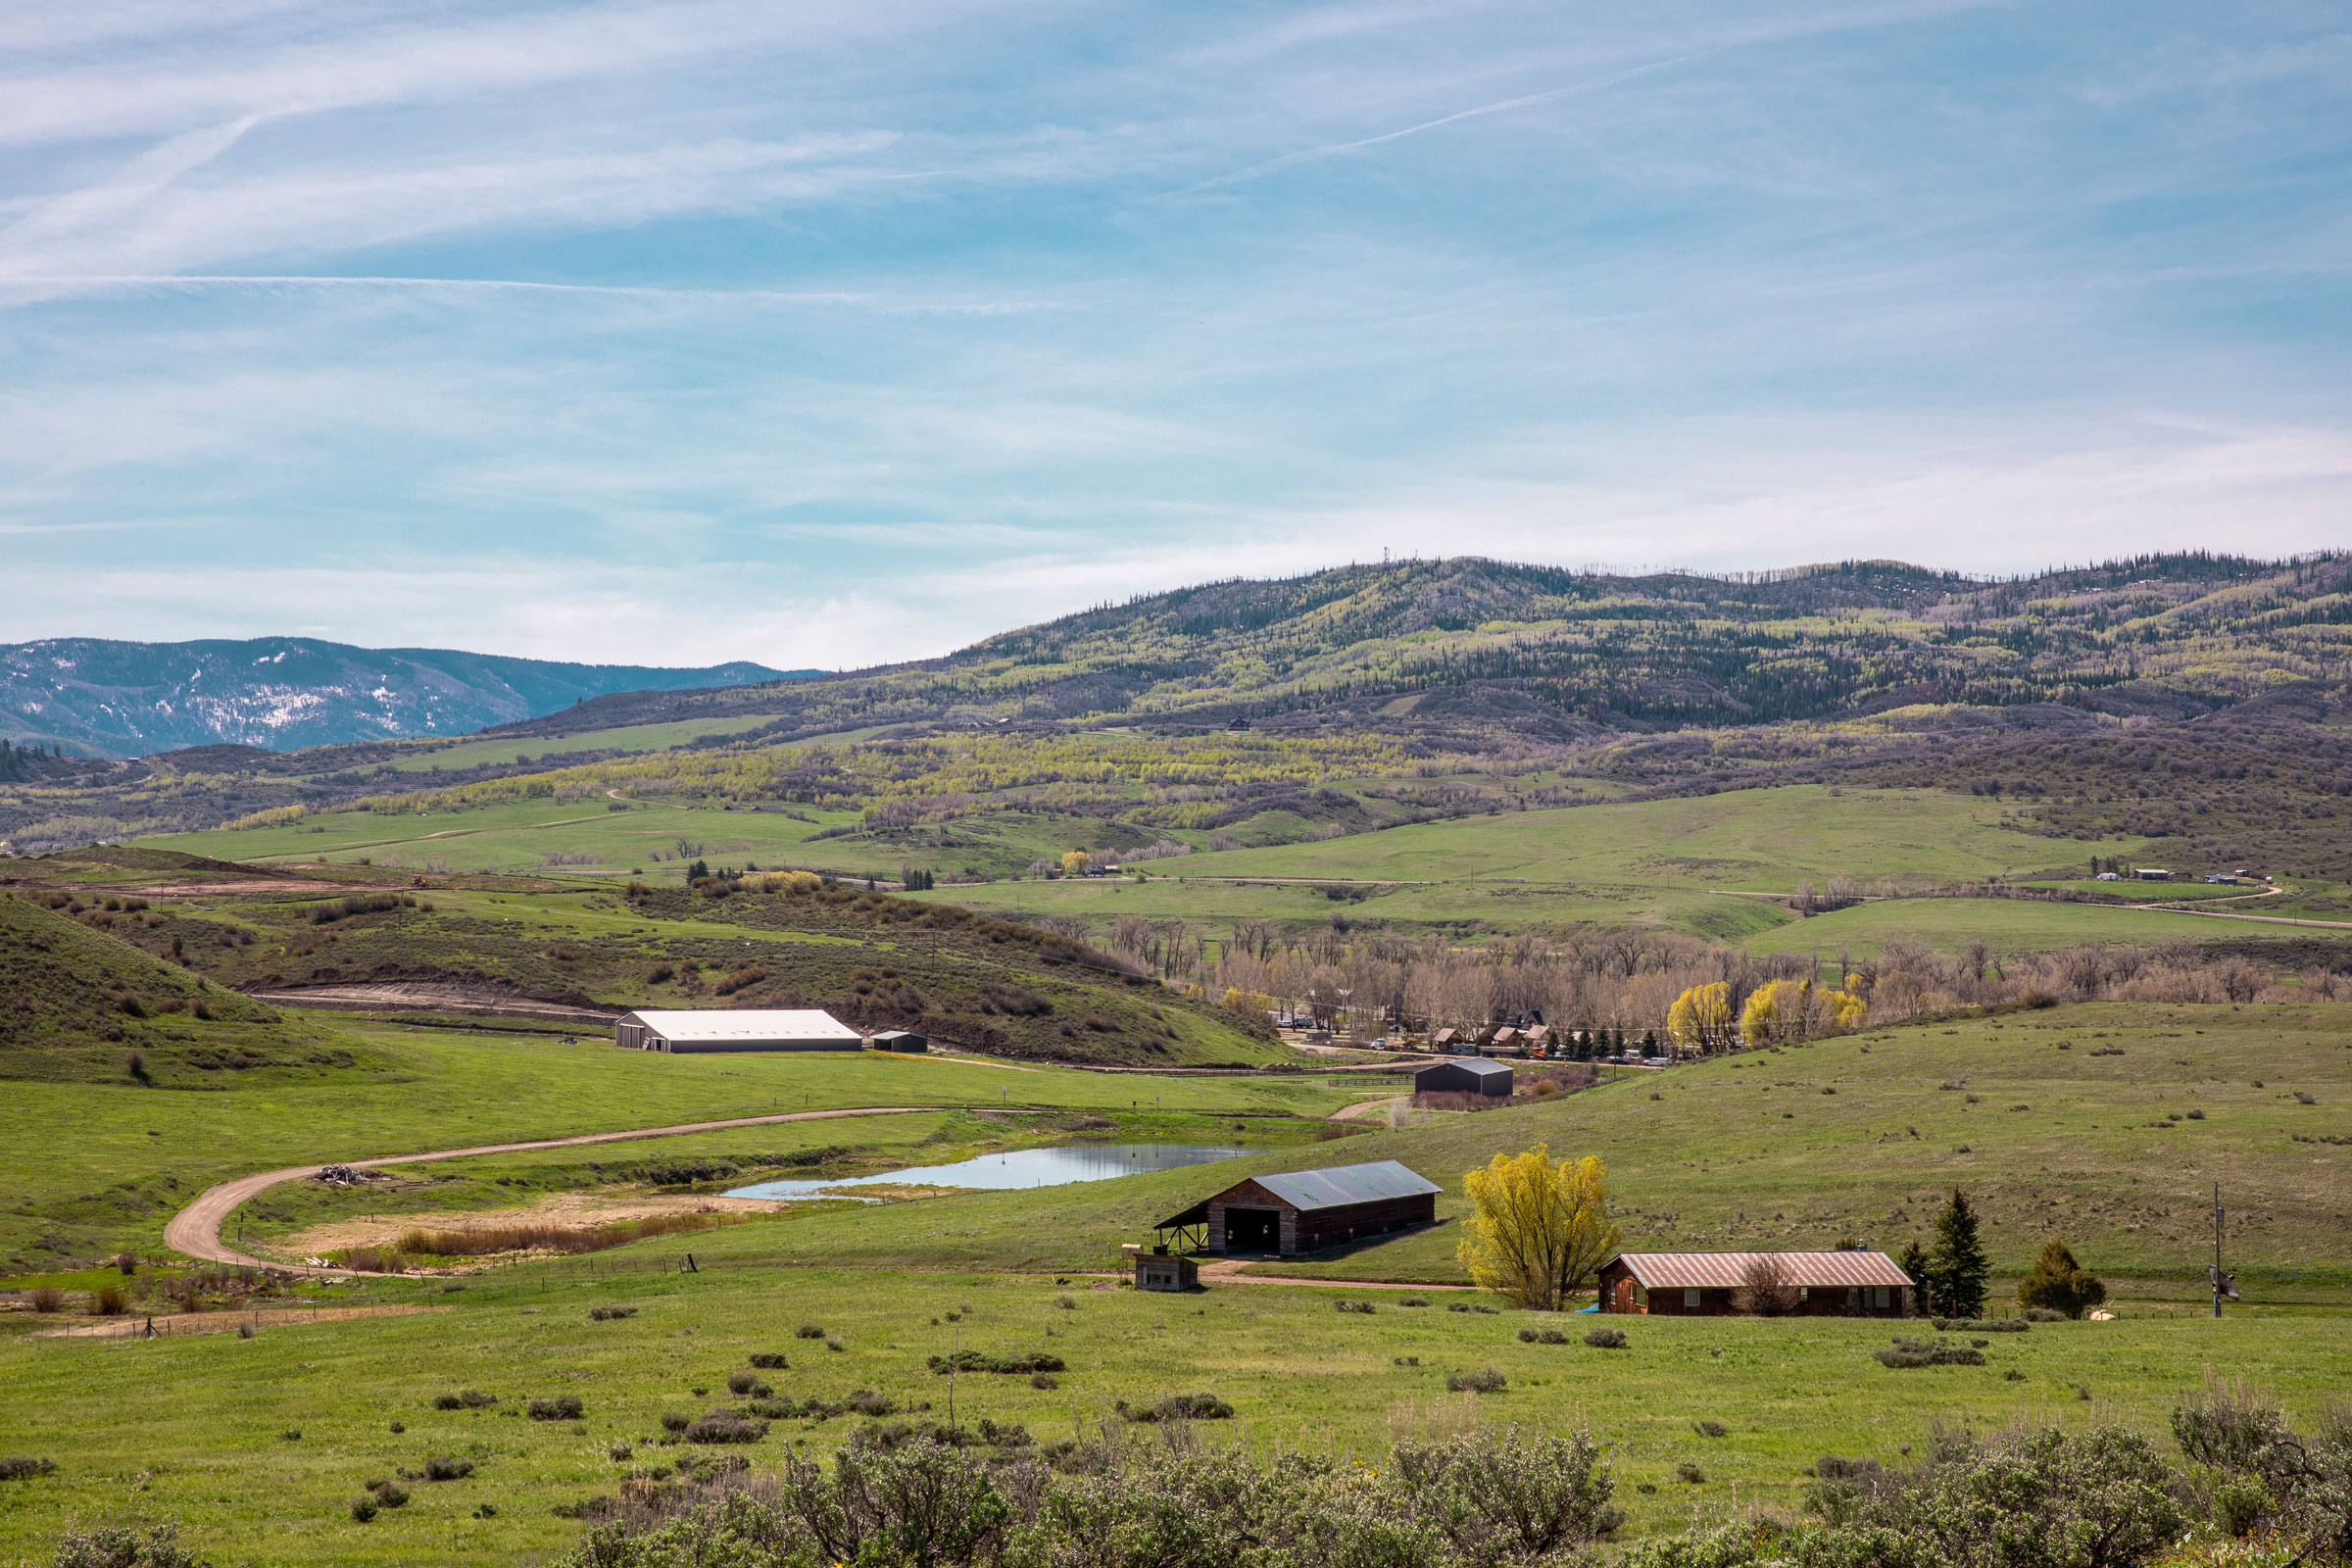 Brown Ranch, a 536-acre property on the west side of Steamboat Springs, Colorado, which was gifted to the Yampa Valley Housing Authority in mid-August 2021 by an anonymous donor. (David Williams for TIME)